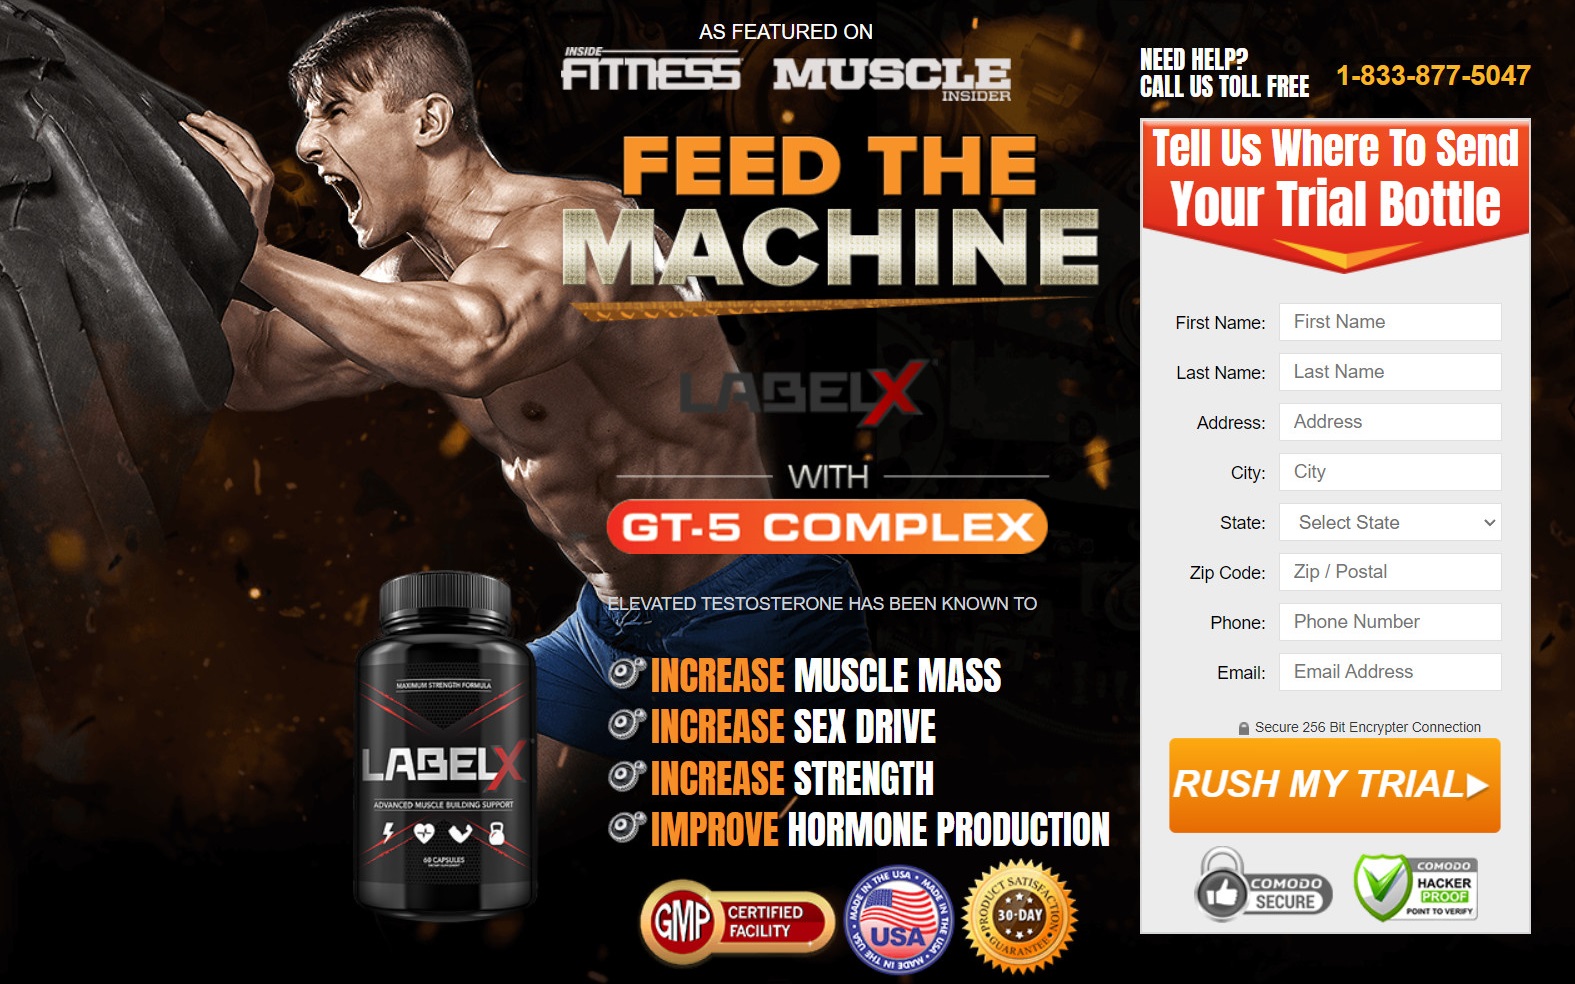 LabelX Muscle Building Support Formula USA (United States) Reviews [Updated  2021] | Complete Food Recipe | Complete Foods